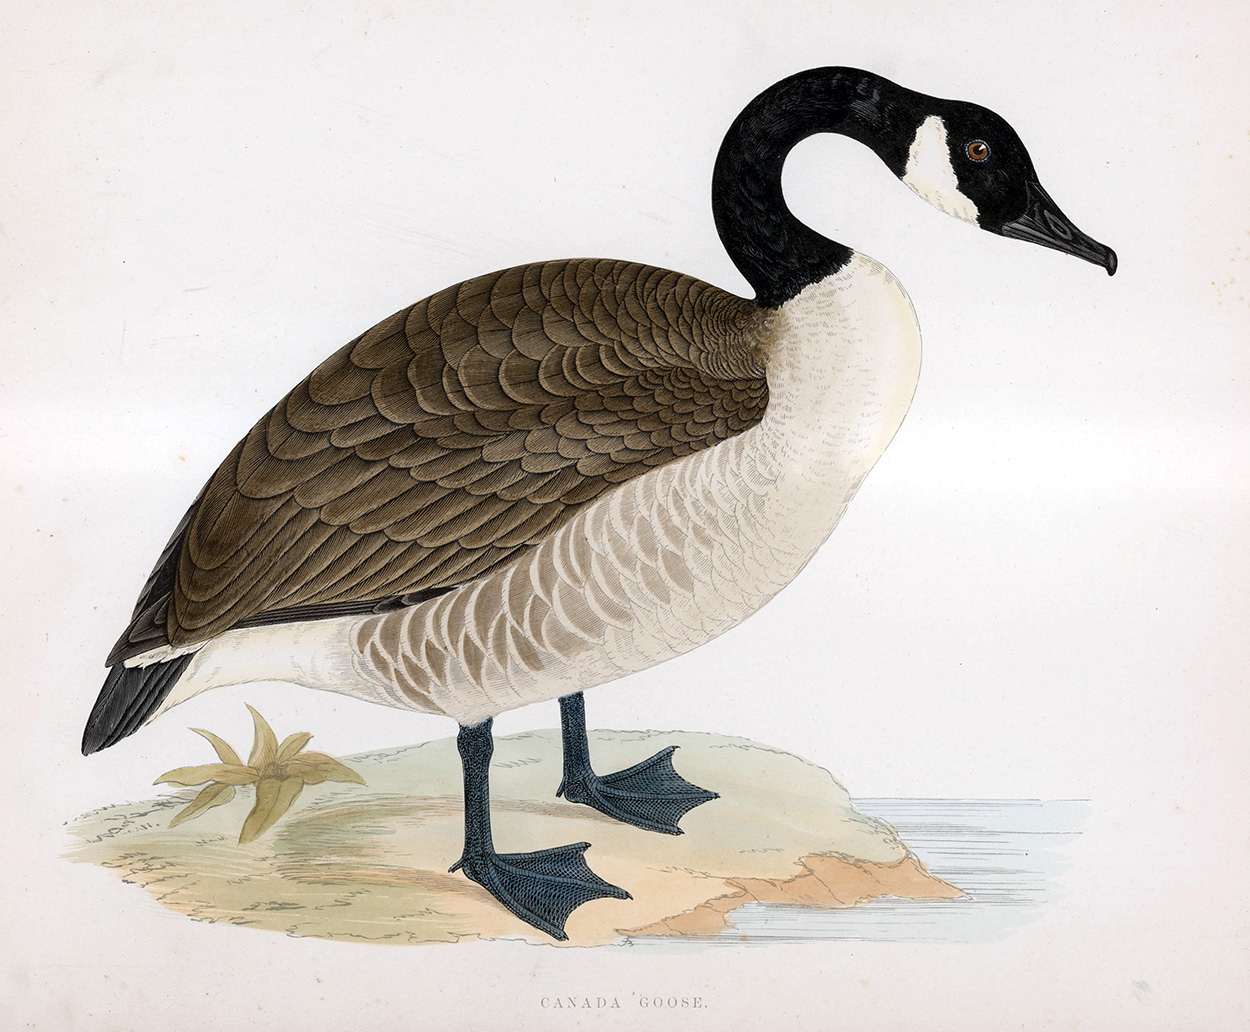 Canada Goose - hand coloured lithograph 1891 (Print) art by Beverley R Morris Art at The Illustration Art Gallery